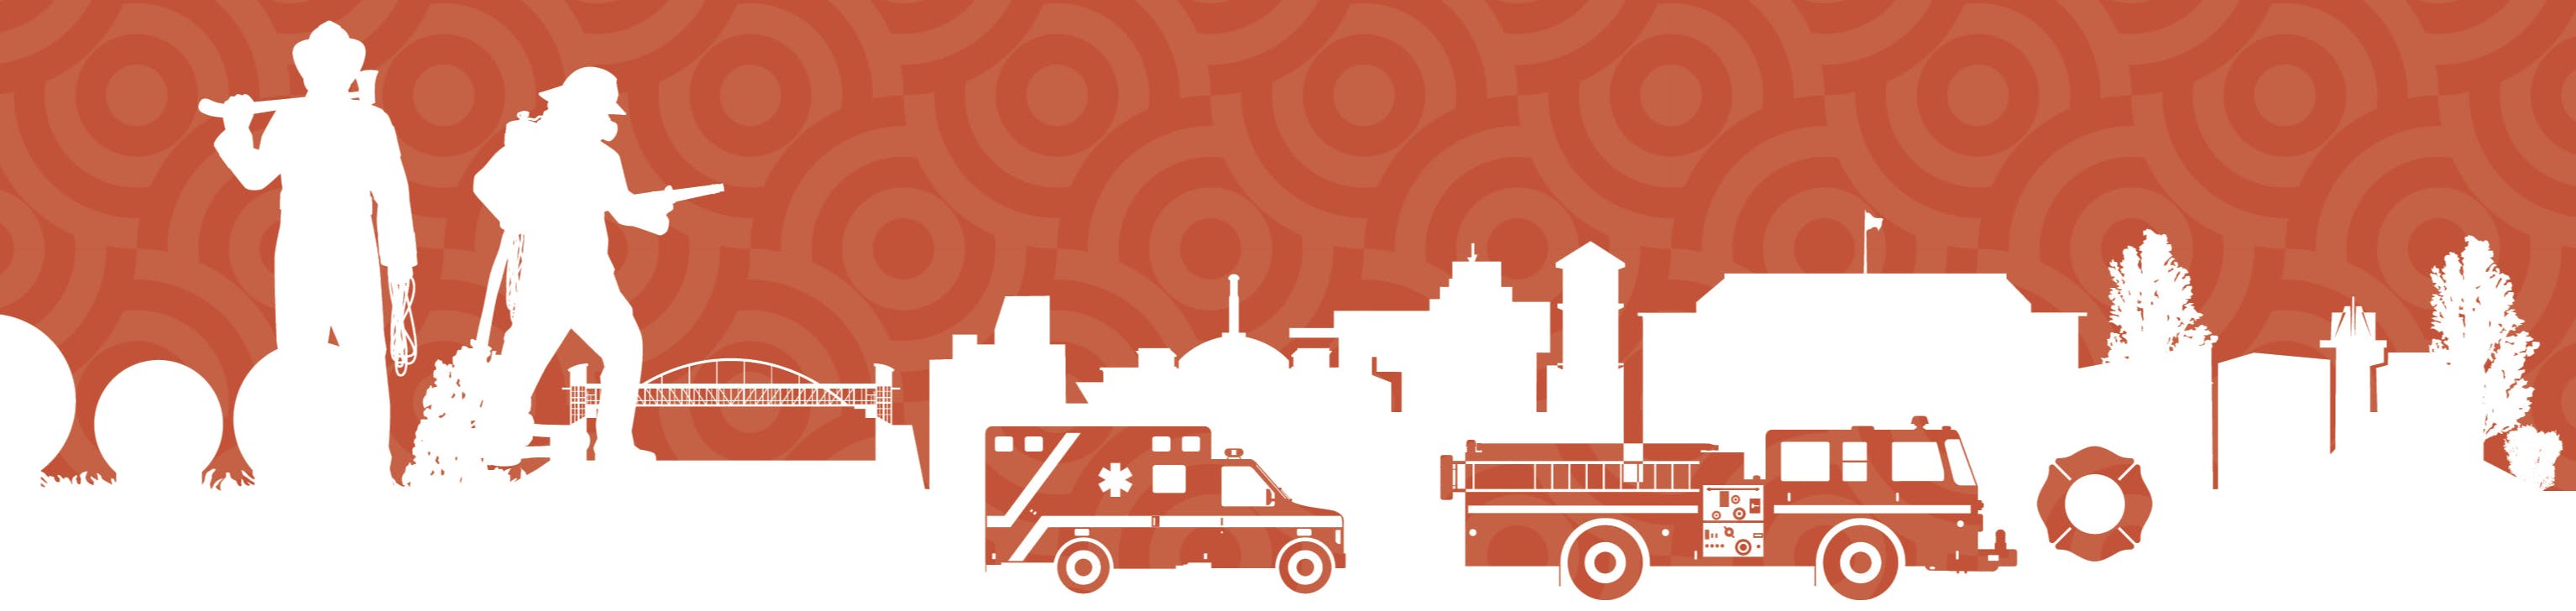 Graphic with outlines of Aurora landmarks along with firetruck, ambulance and firefighters